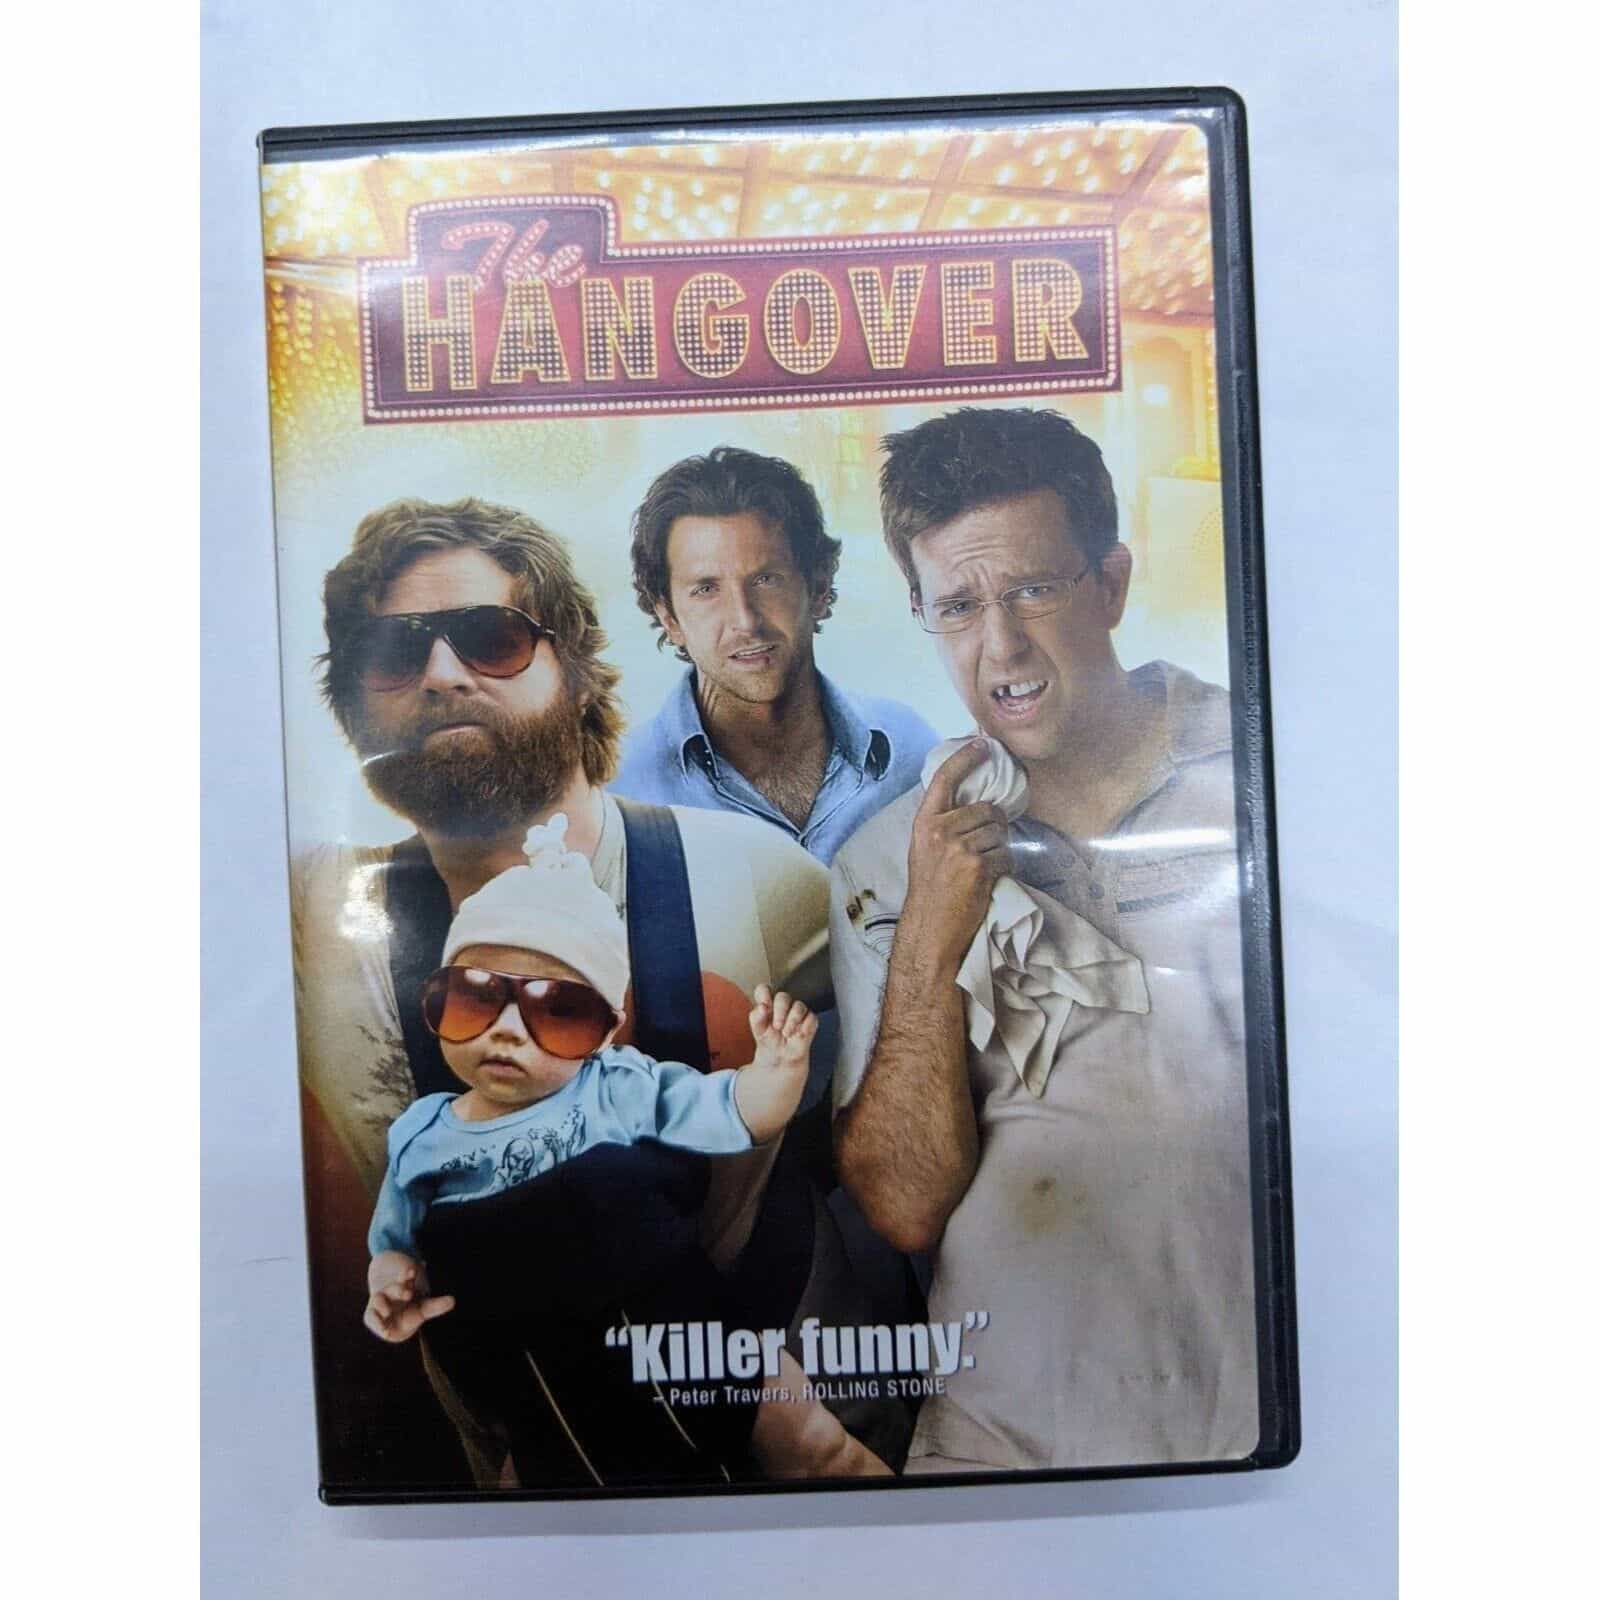 The Hangover DVD movie